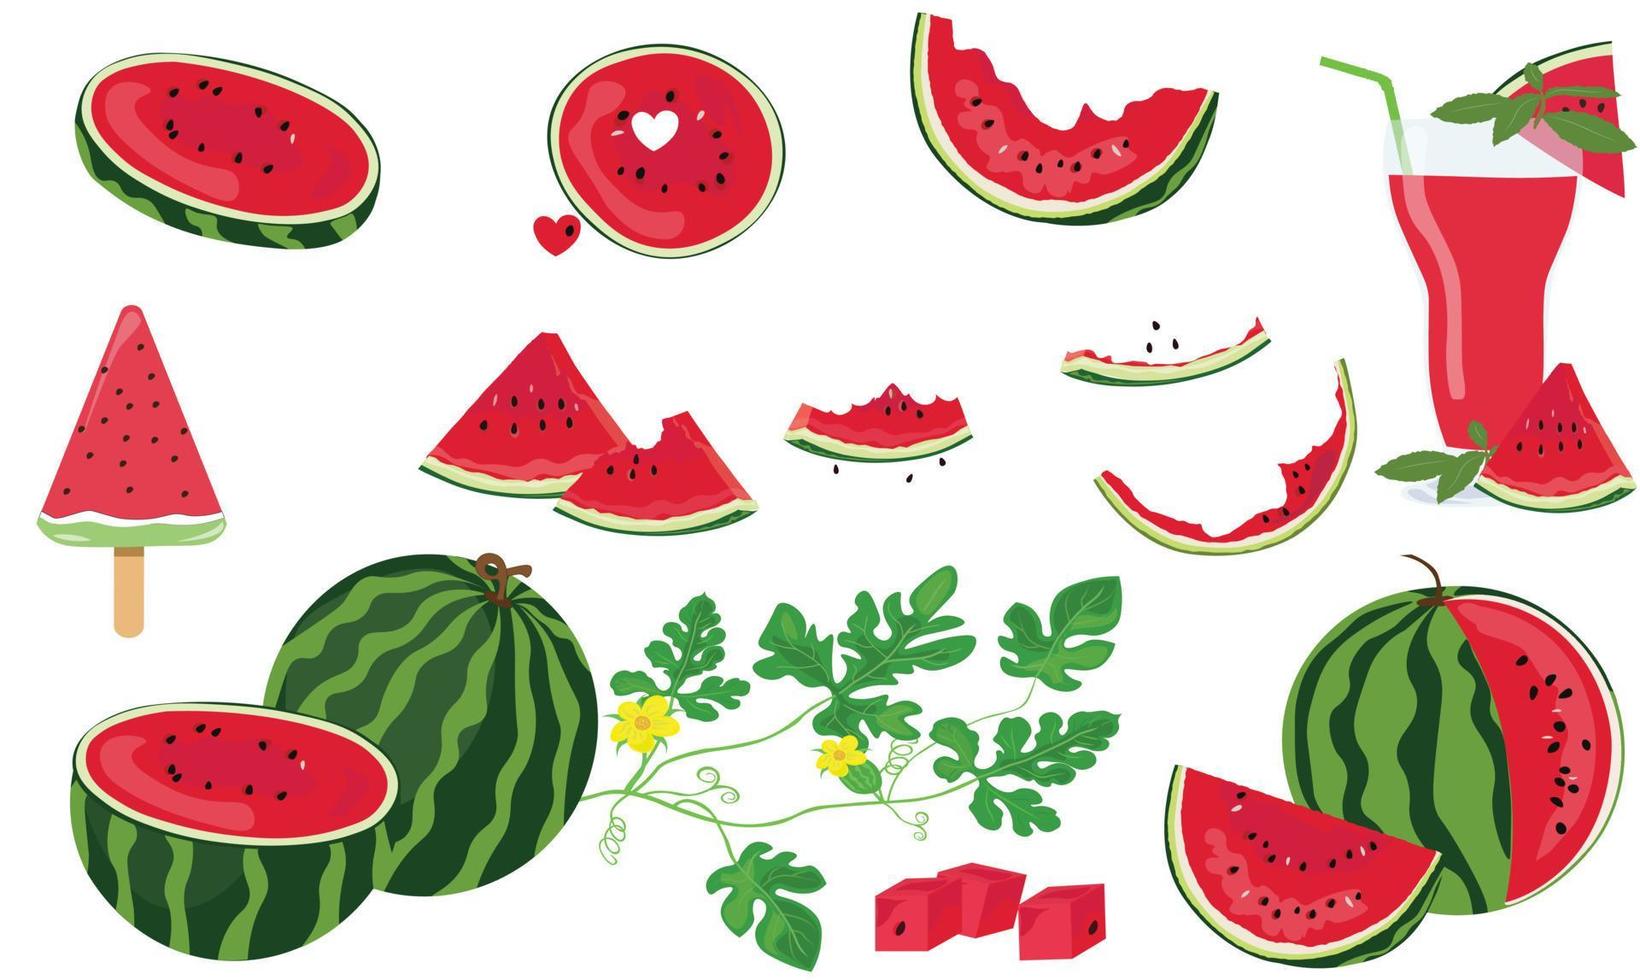 Watermelon vector set isolated on white background. Watermelon juice glass, watermelon icecream. Colection of watermelon includes  slice, rind, seed, flower, leaf,... Flat vector, cartoon style.